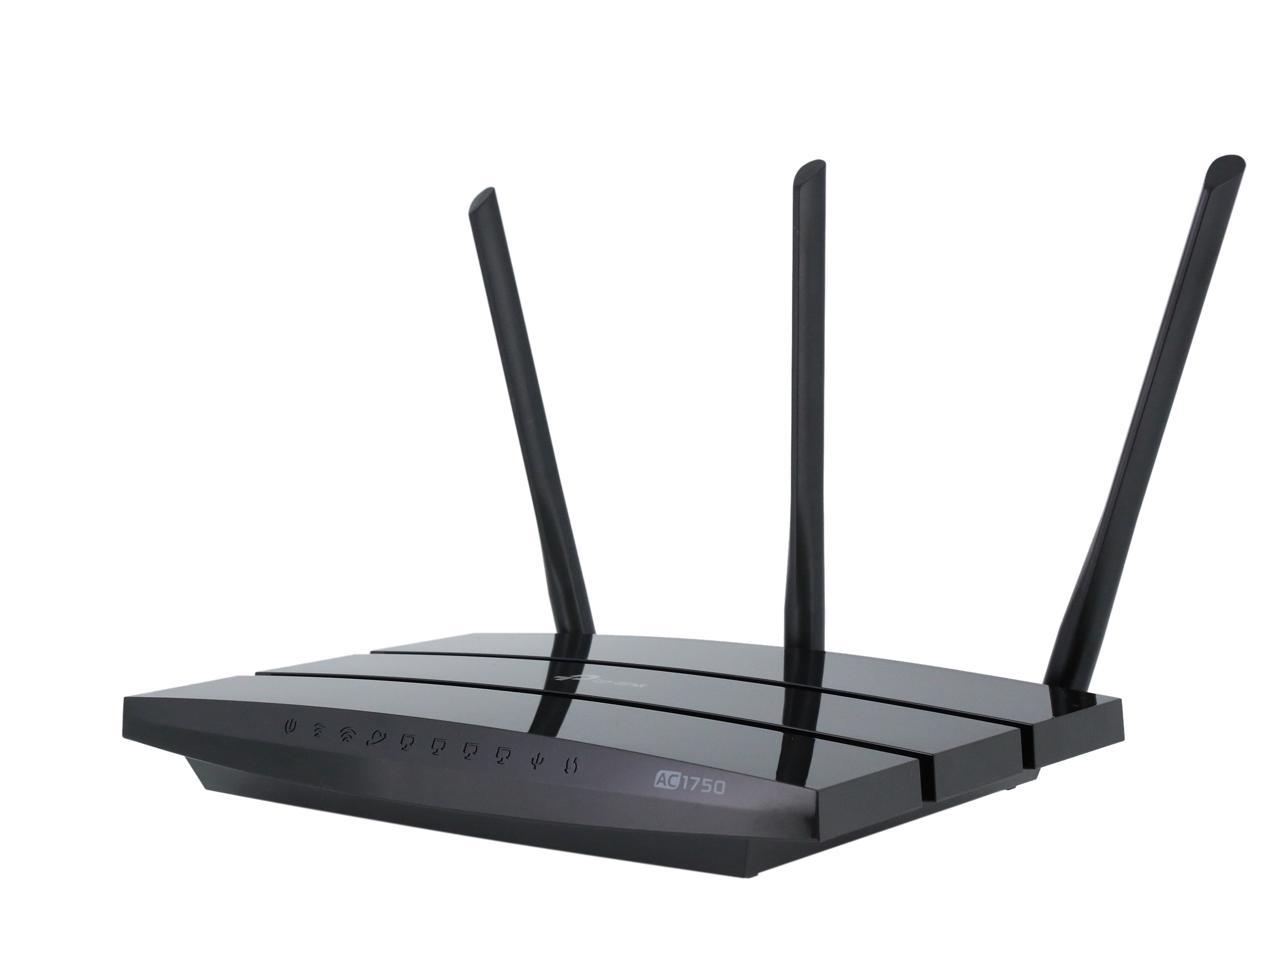 TP-Link Archer A7,AC1750 Wireless Dual Band Gigabit Router Official Recertified 